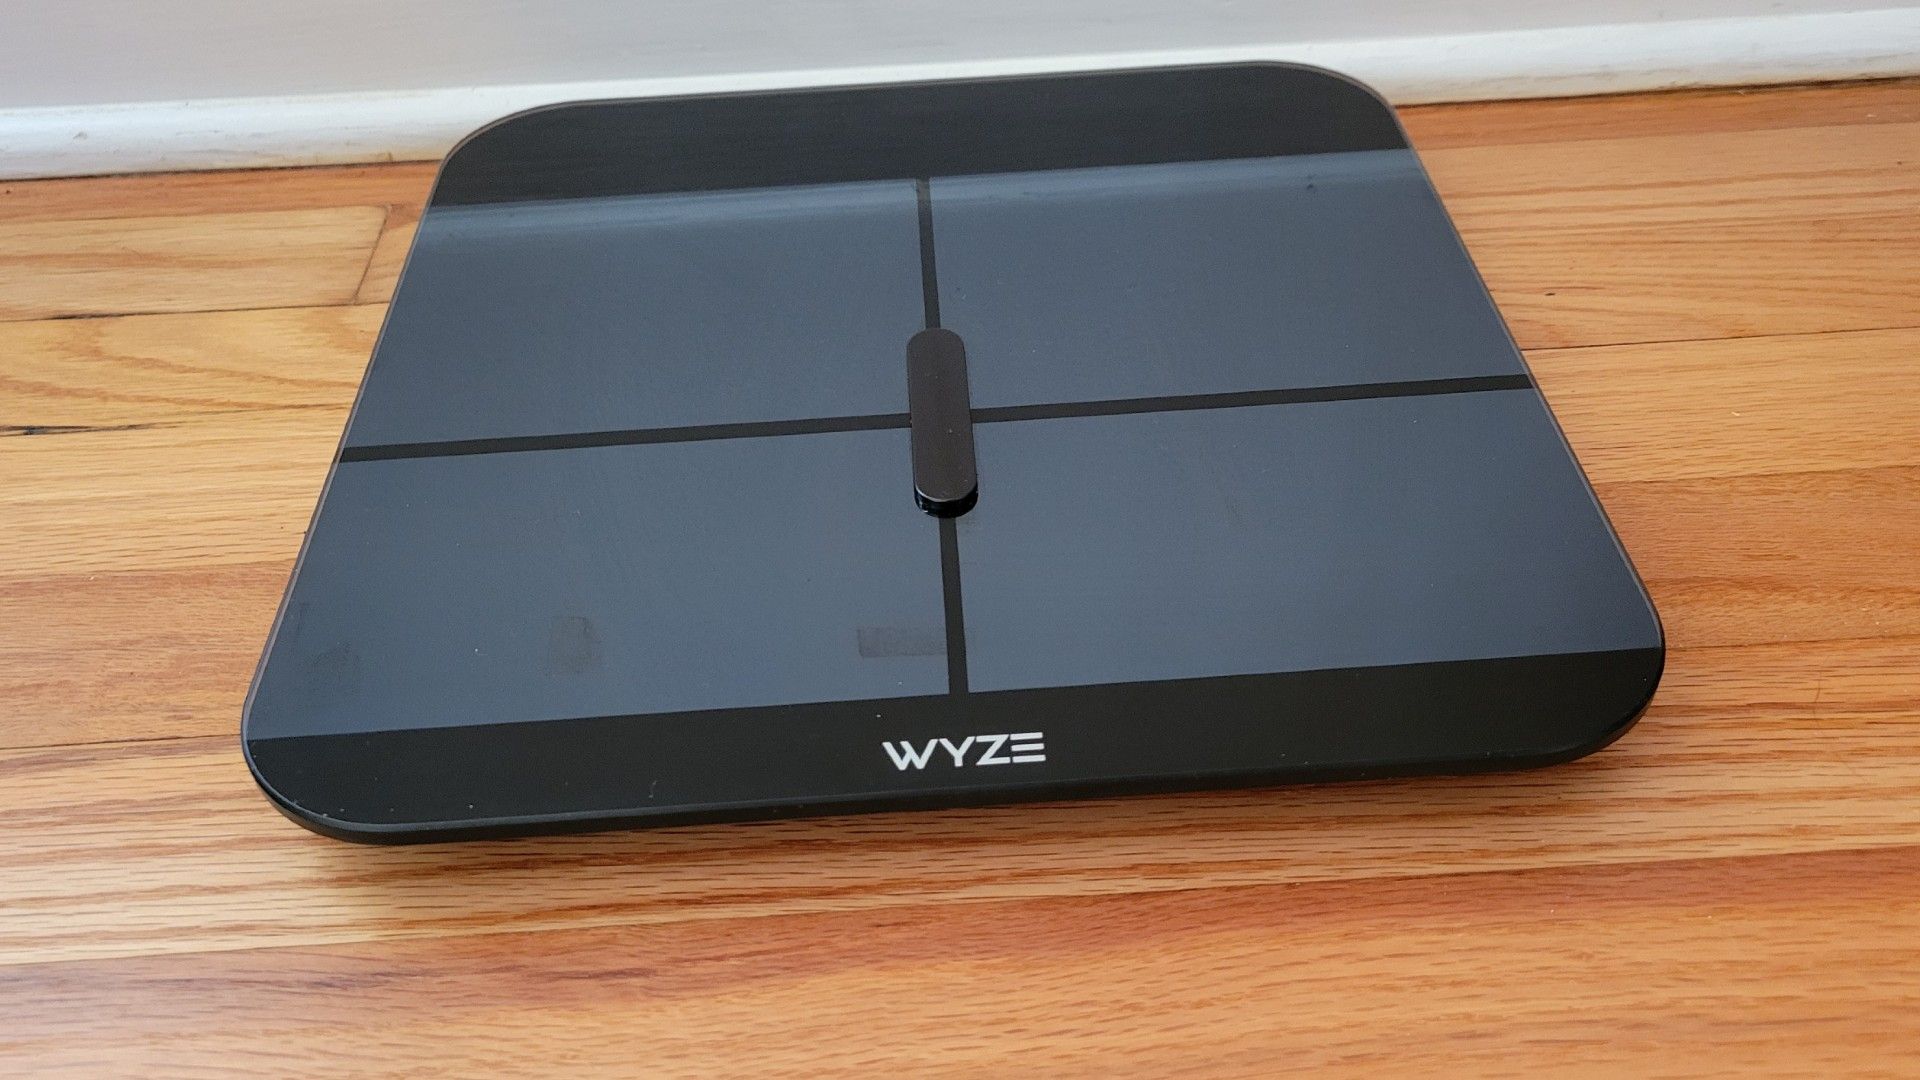 How To Set Up Wyze Smart Scale X 